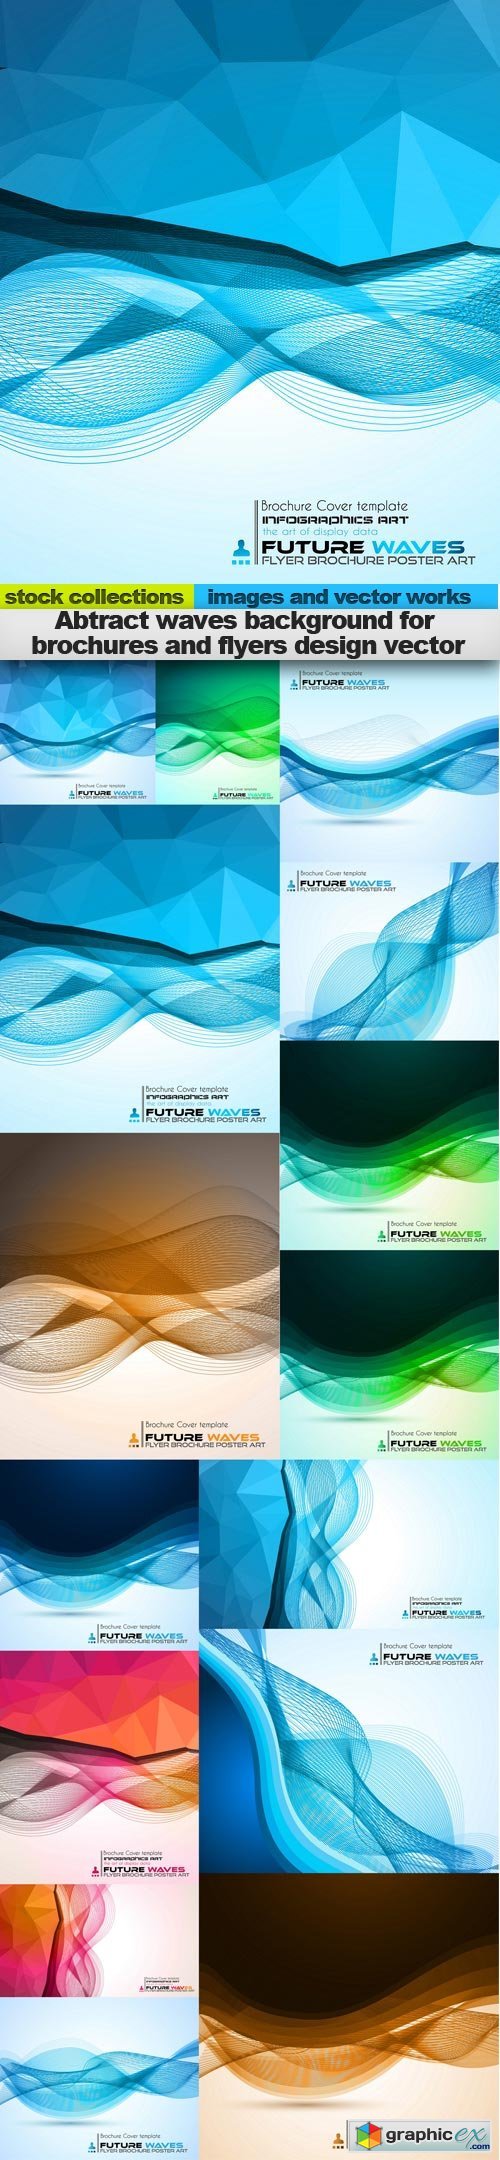 Abtract waves background for brochures and flyers design vector, 15 x EPS